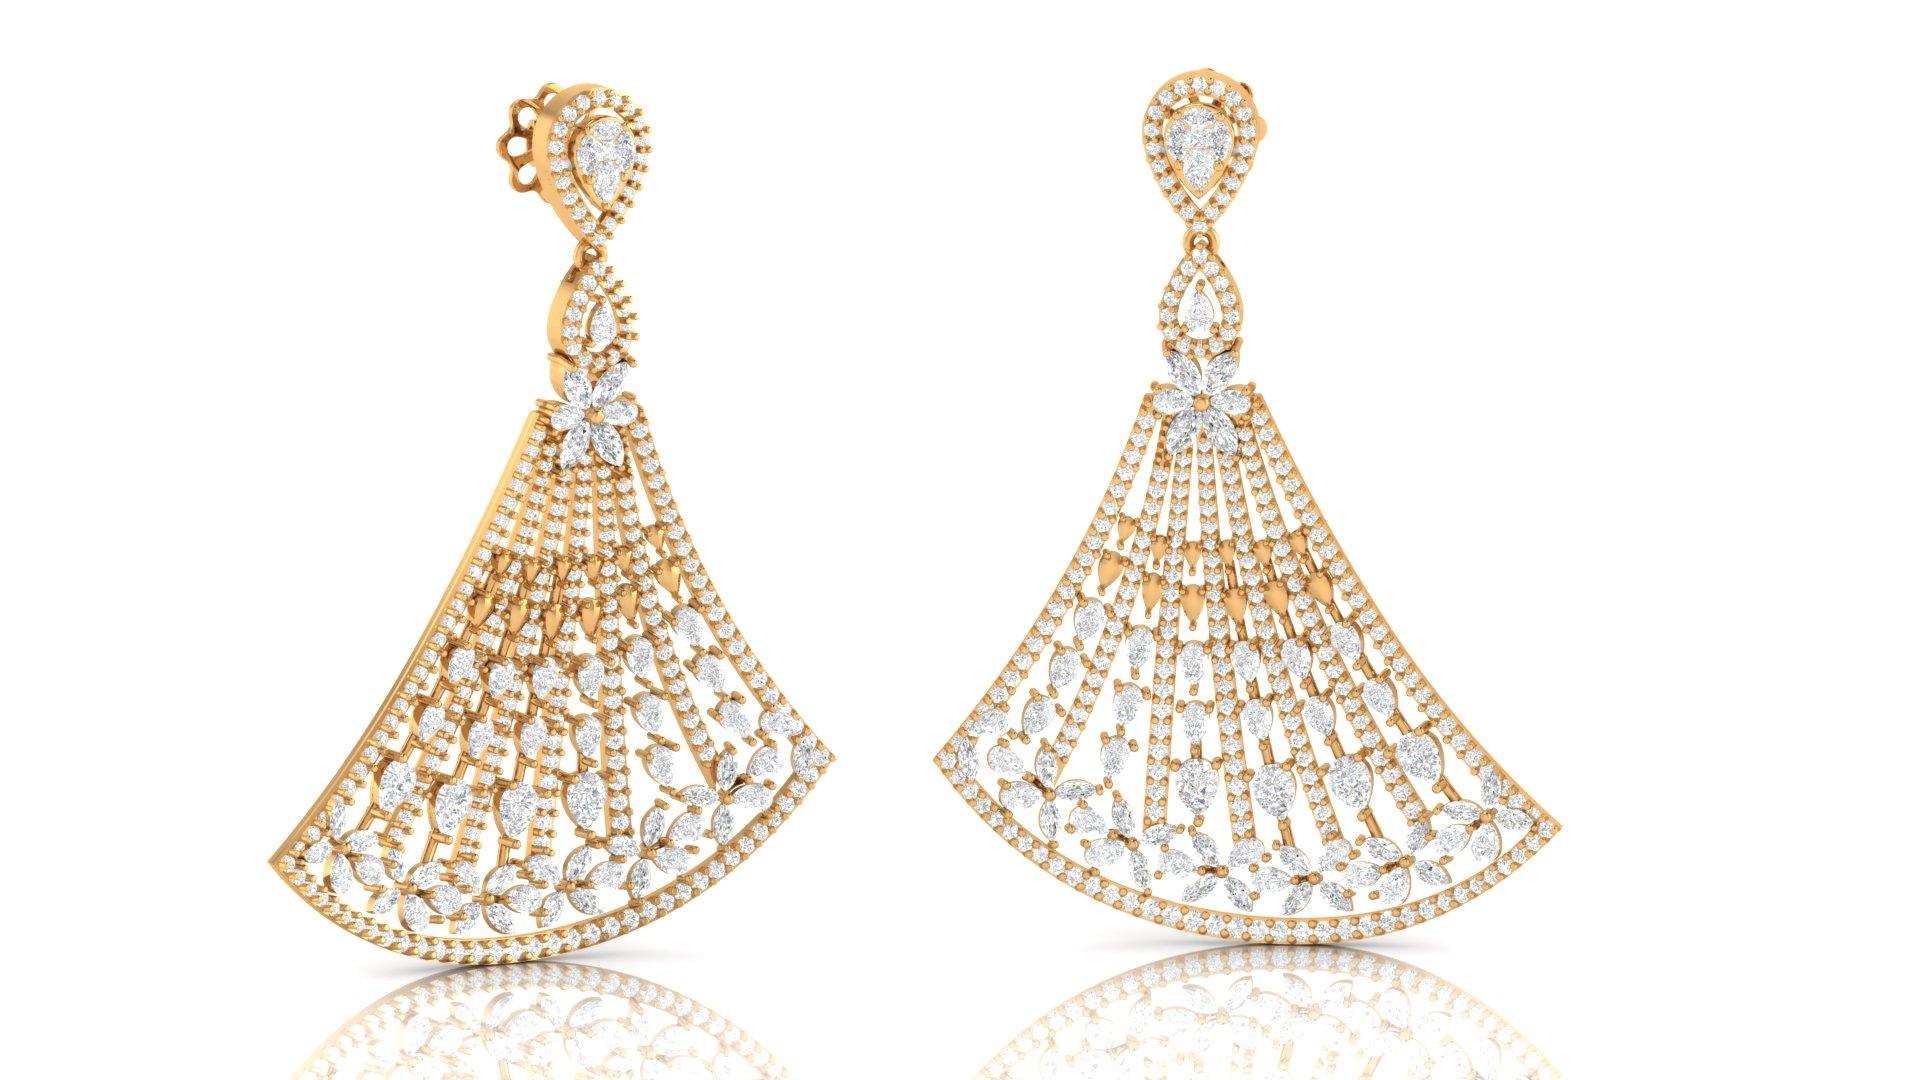 These unique designers set of earrings are sure to leave people enchanted. Artistic expression combined all-natural diamonds make these a must have that go with any dress, or occasion. Available in Yellow, white, and Rose gold. approximately 9 carat